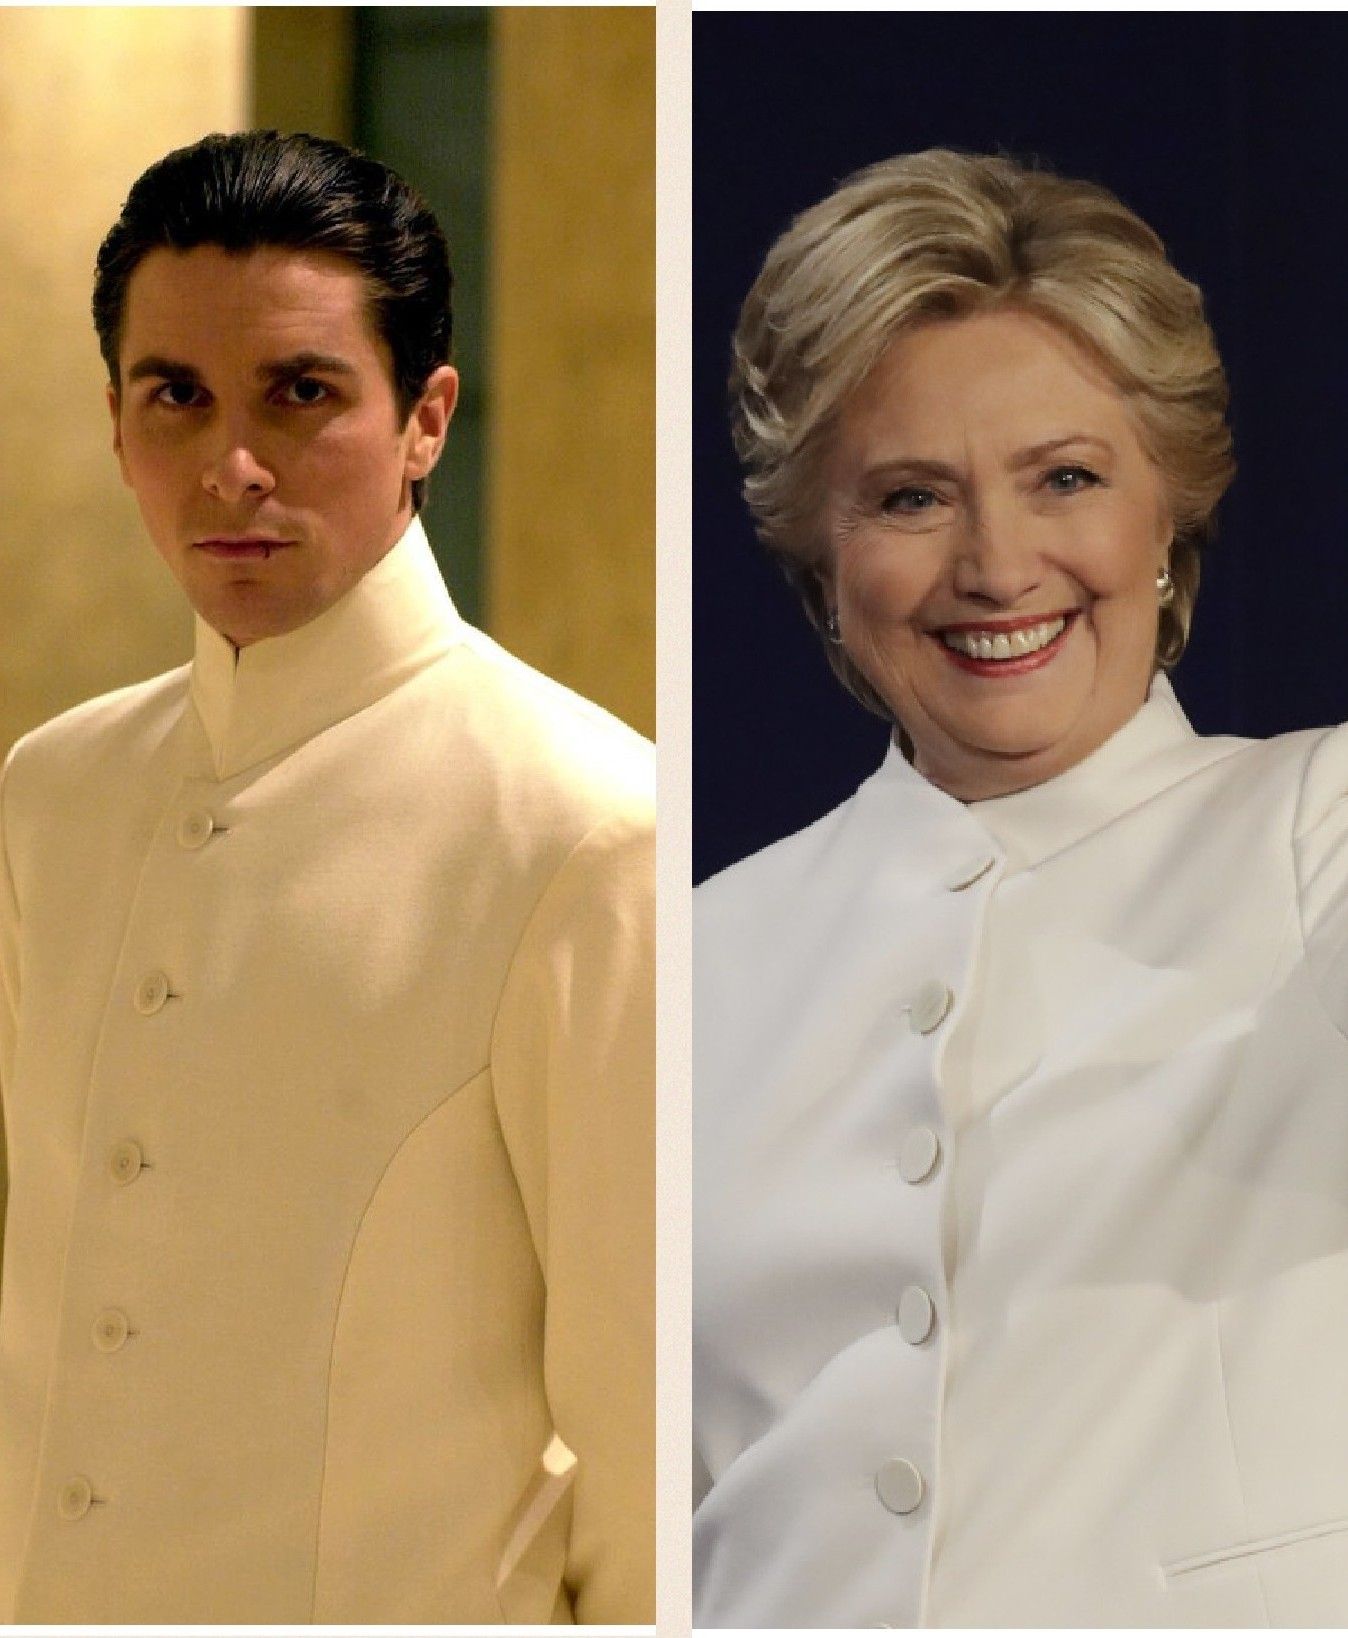 Hillary Clinton dresses as Christian Bale at the debate